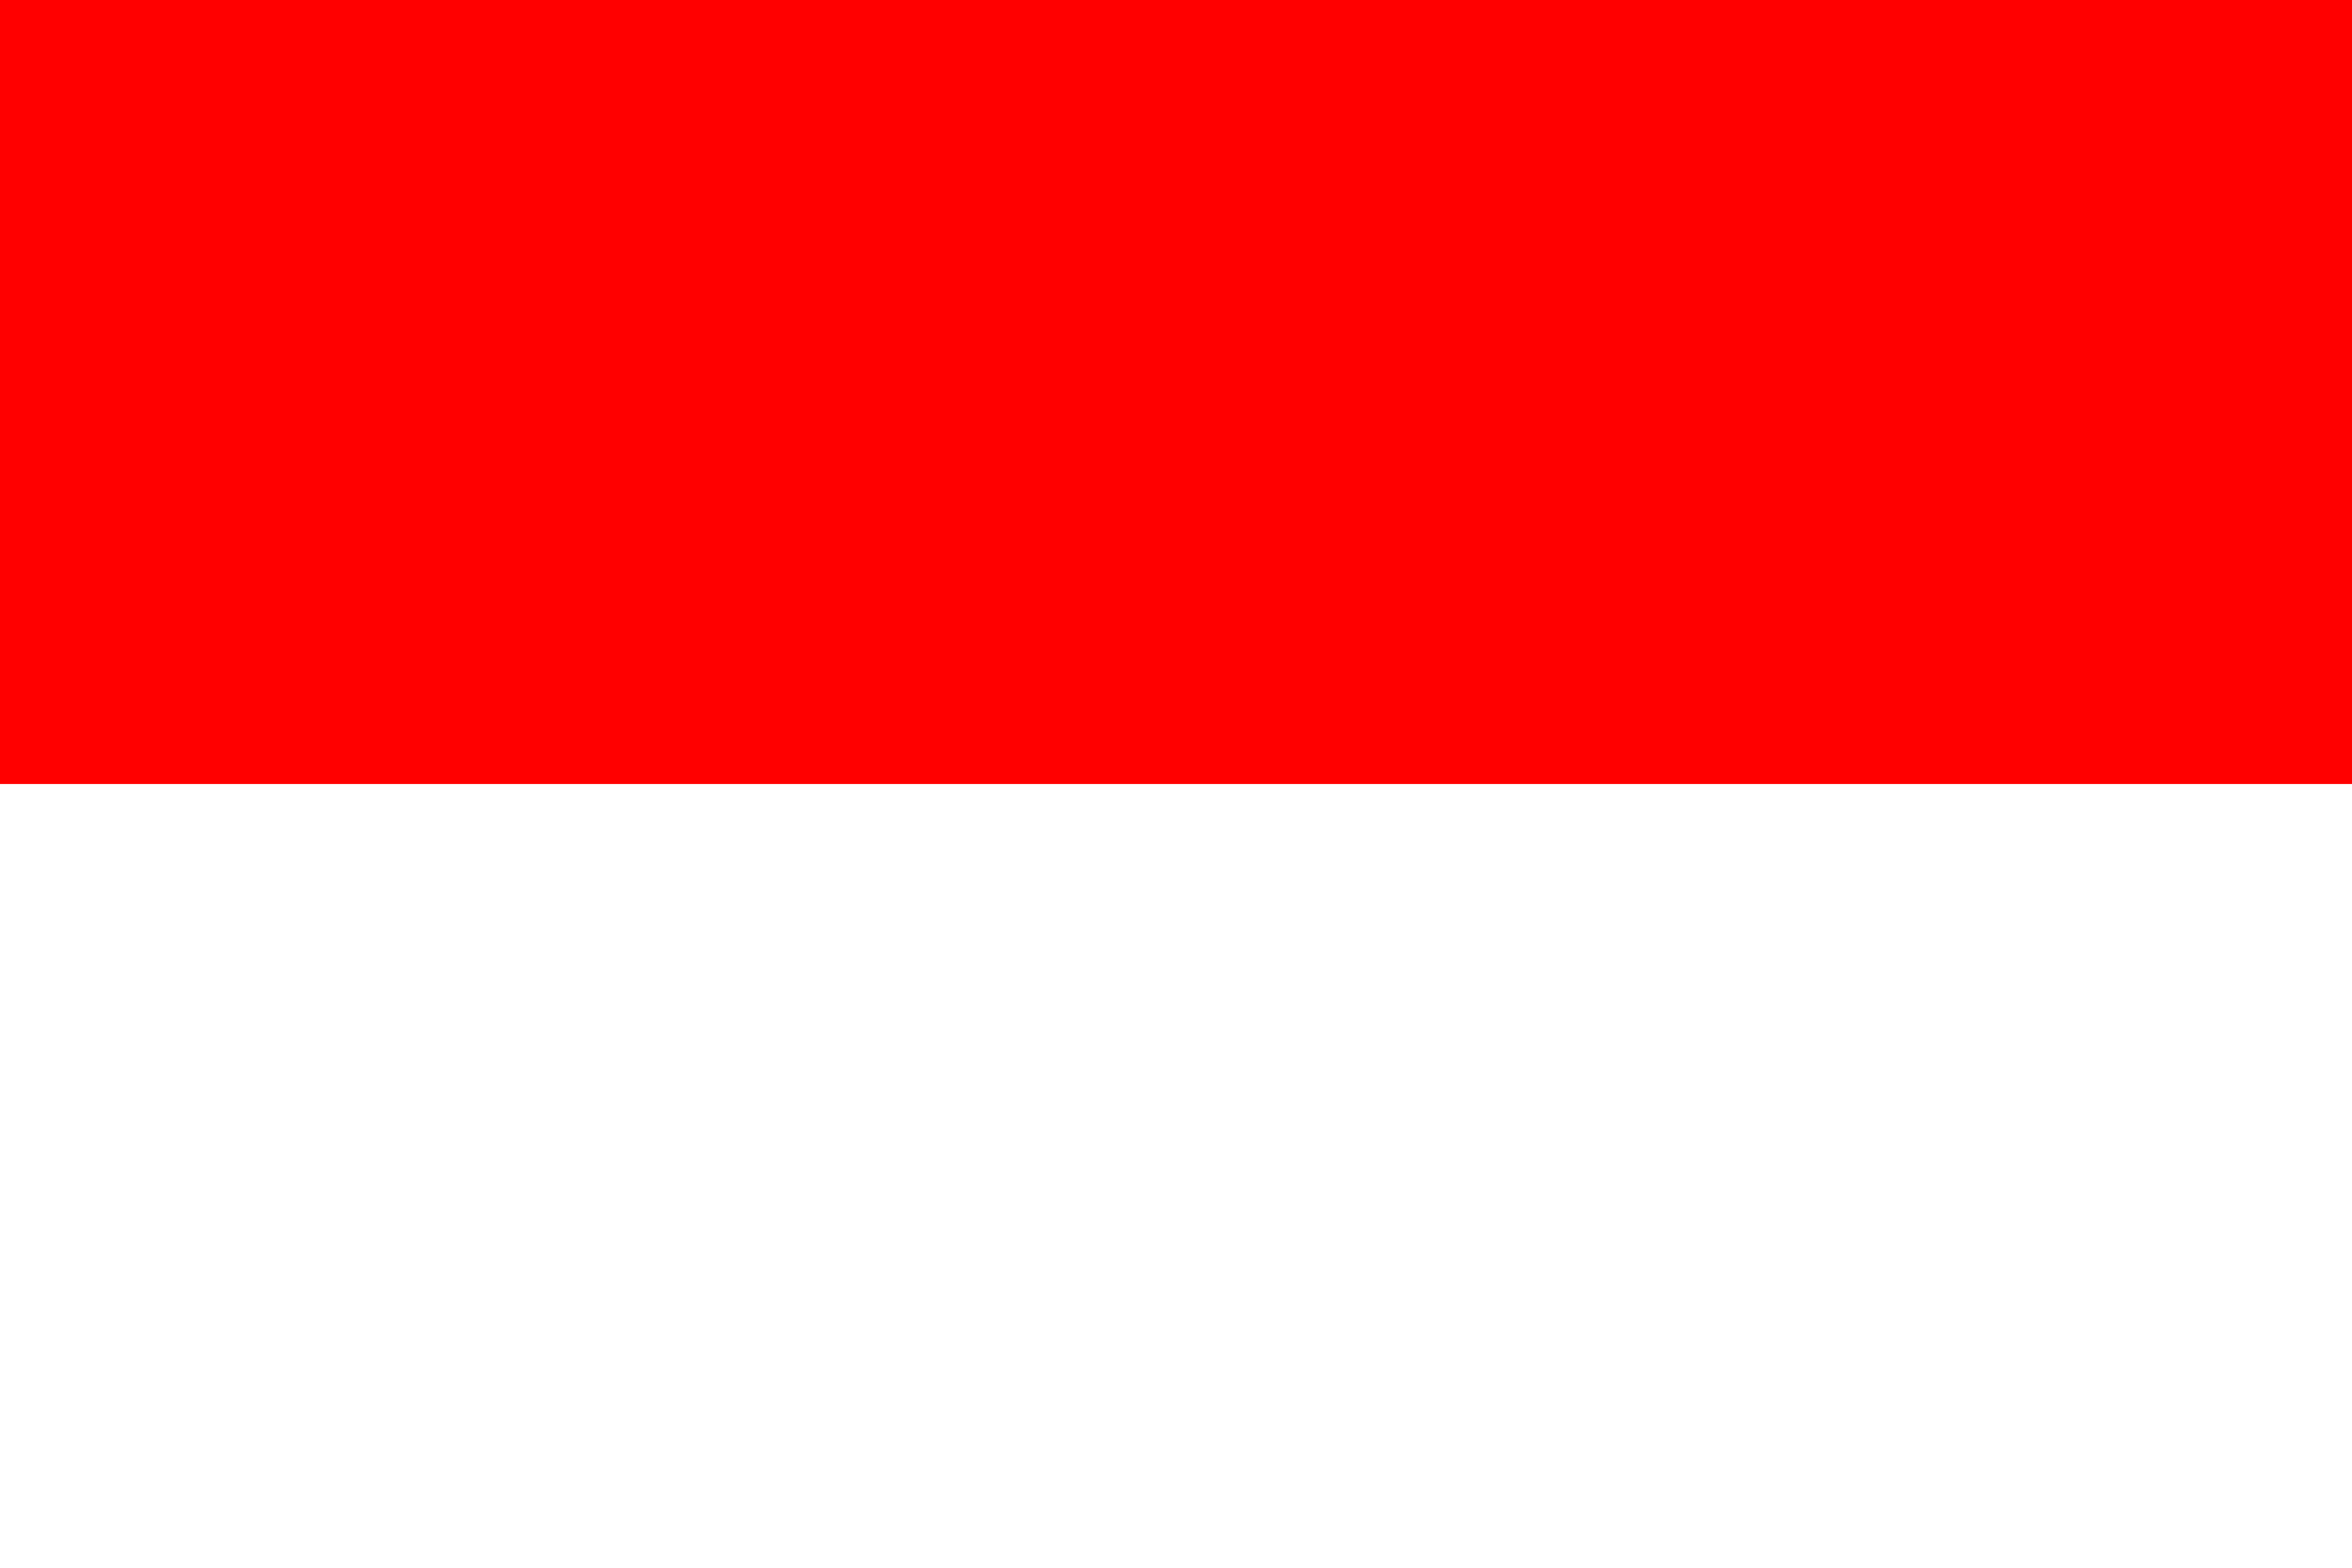 Drone Laws in Indonesia